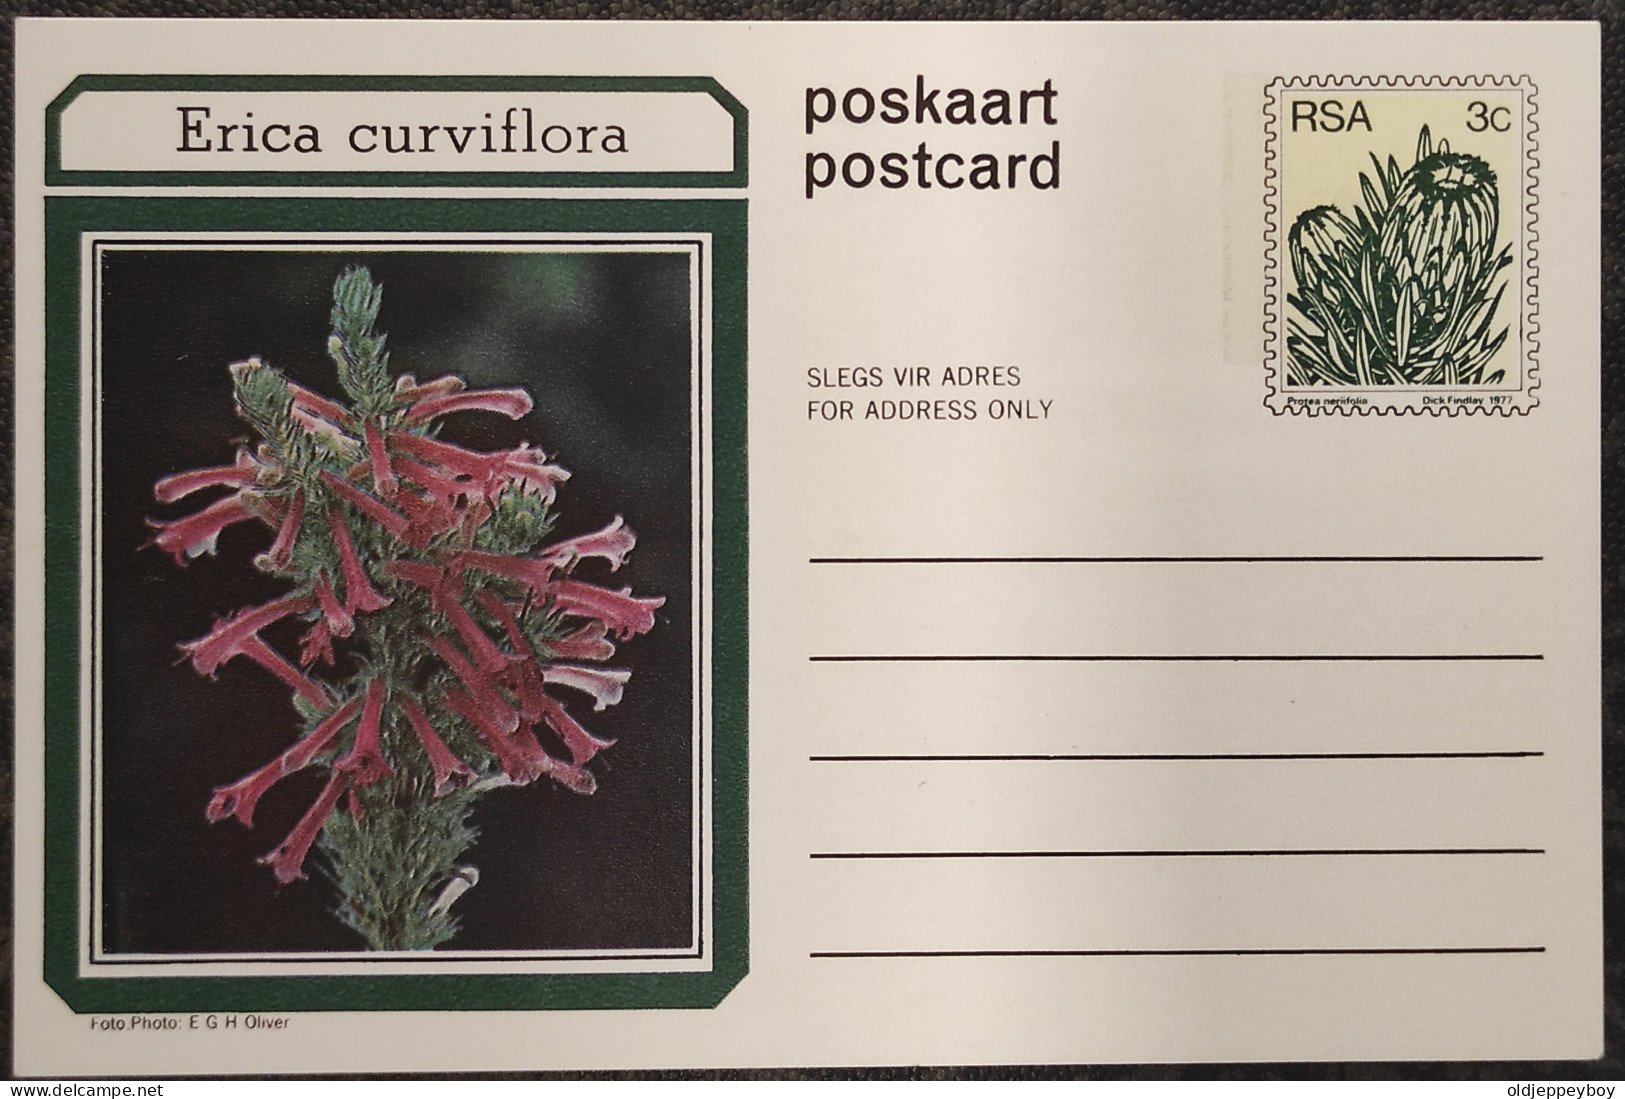 3c SOUTH AFRICA Postal STATIONERY CARD Illus ERICA CURVIFLORA FLOWER Cover Stamps Flowers Rsa - Storia Postale